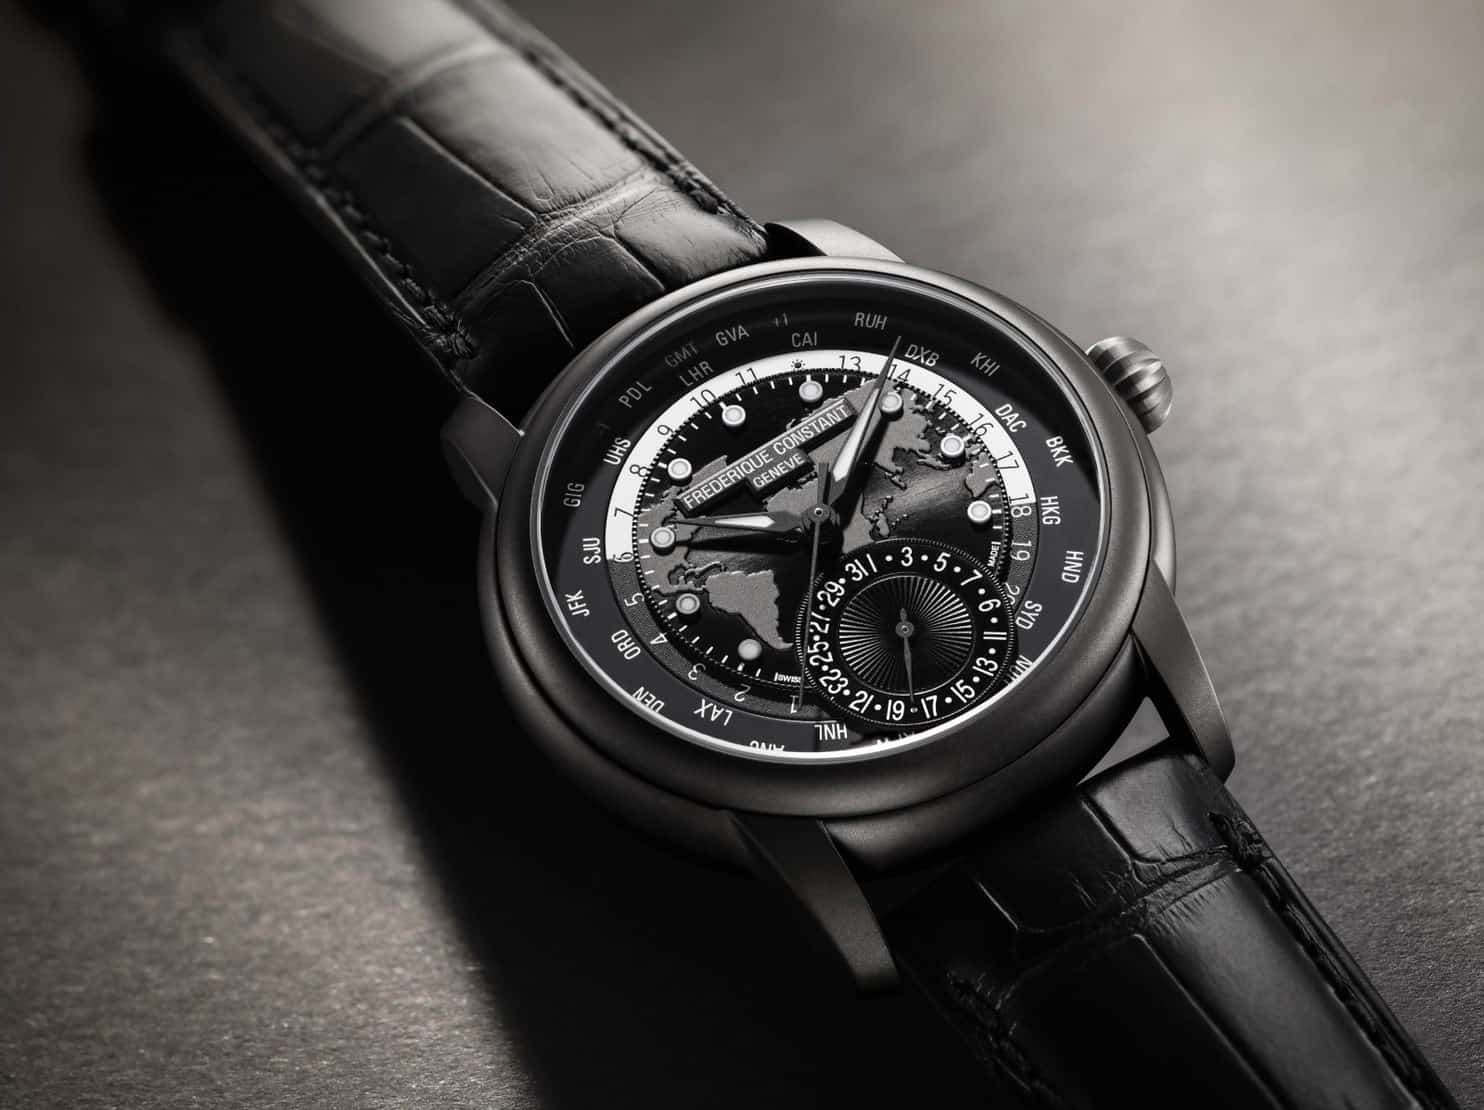 Frederique Constant Rings in Black Friday with the All Black Classics  Worldtimer Manufacture Globetrotter Limited Edition - Worn & Wound